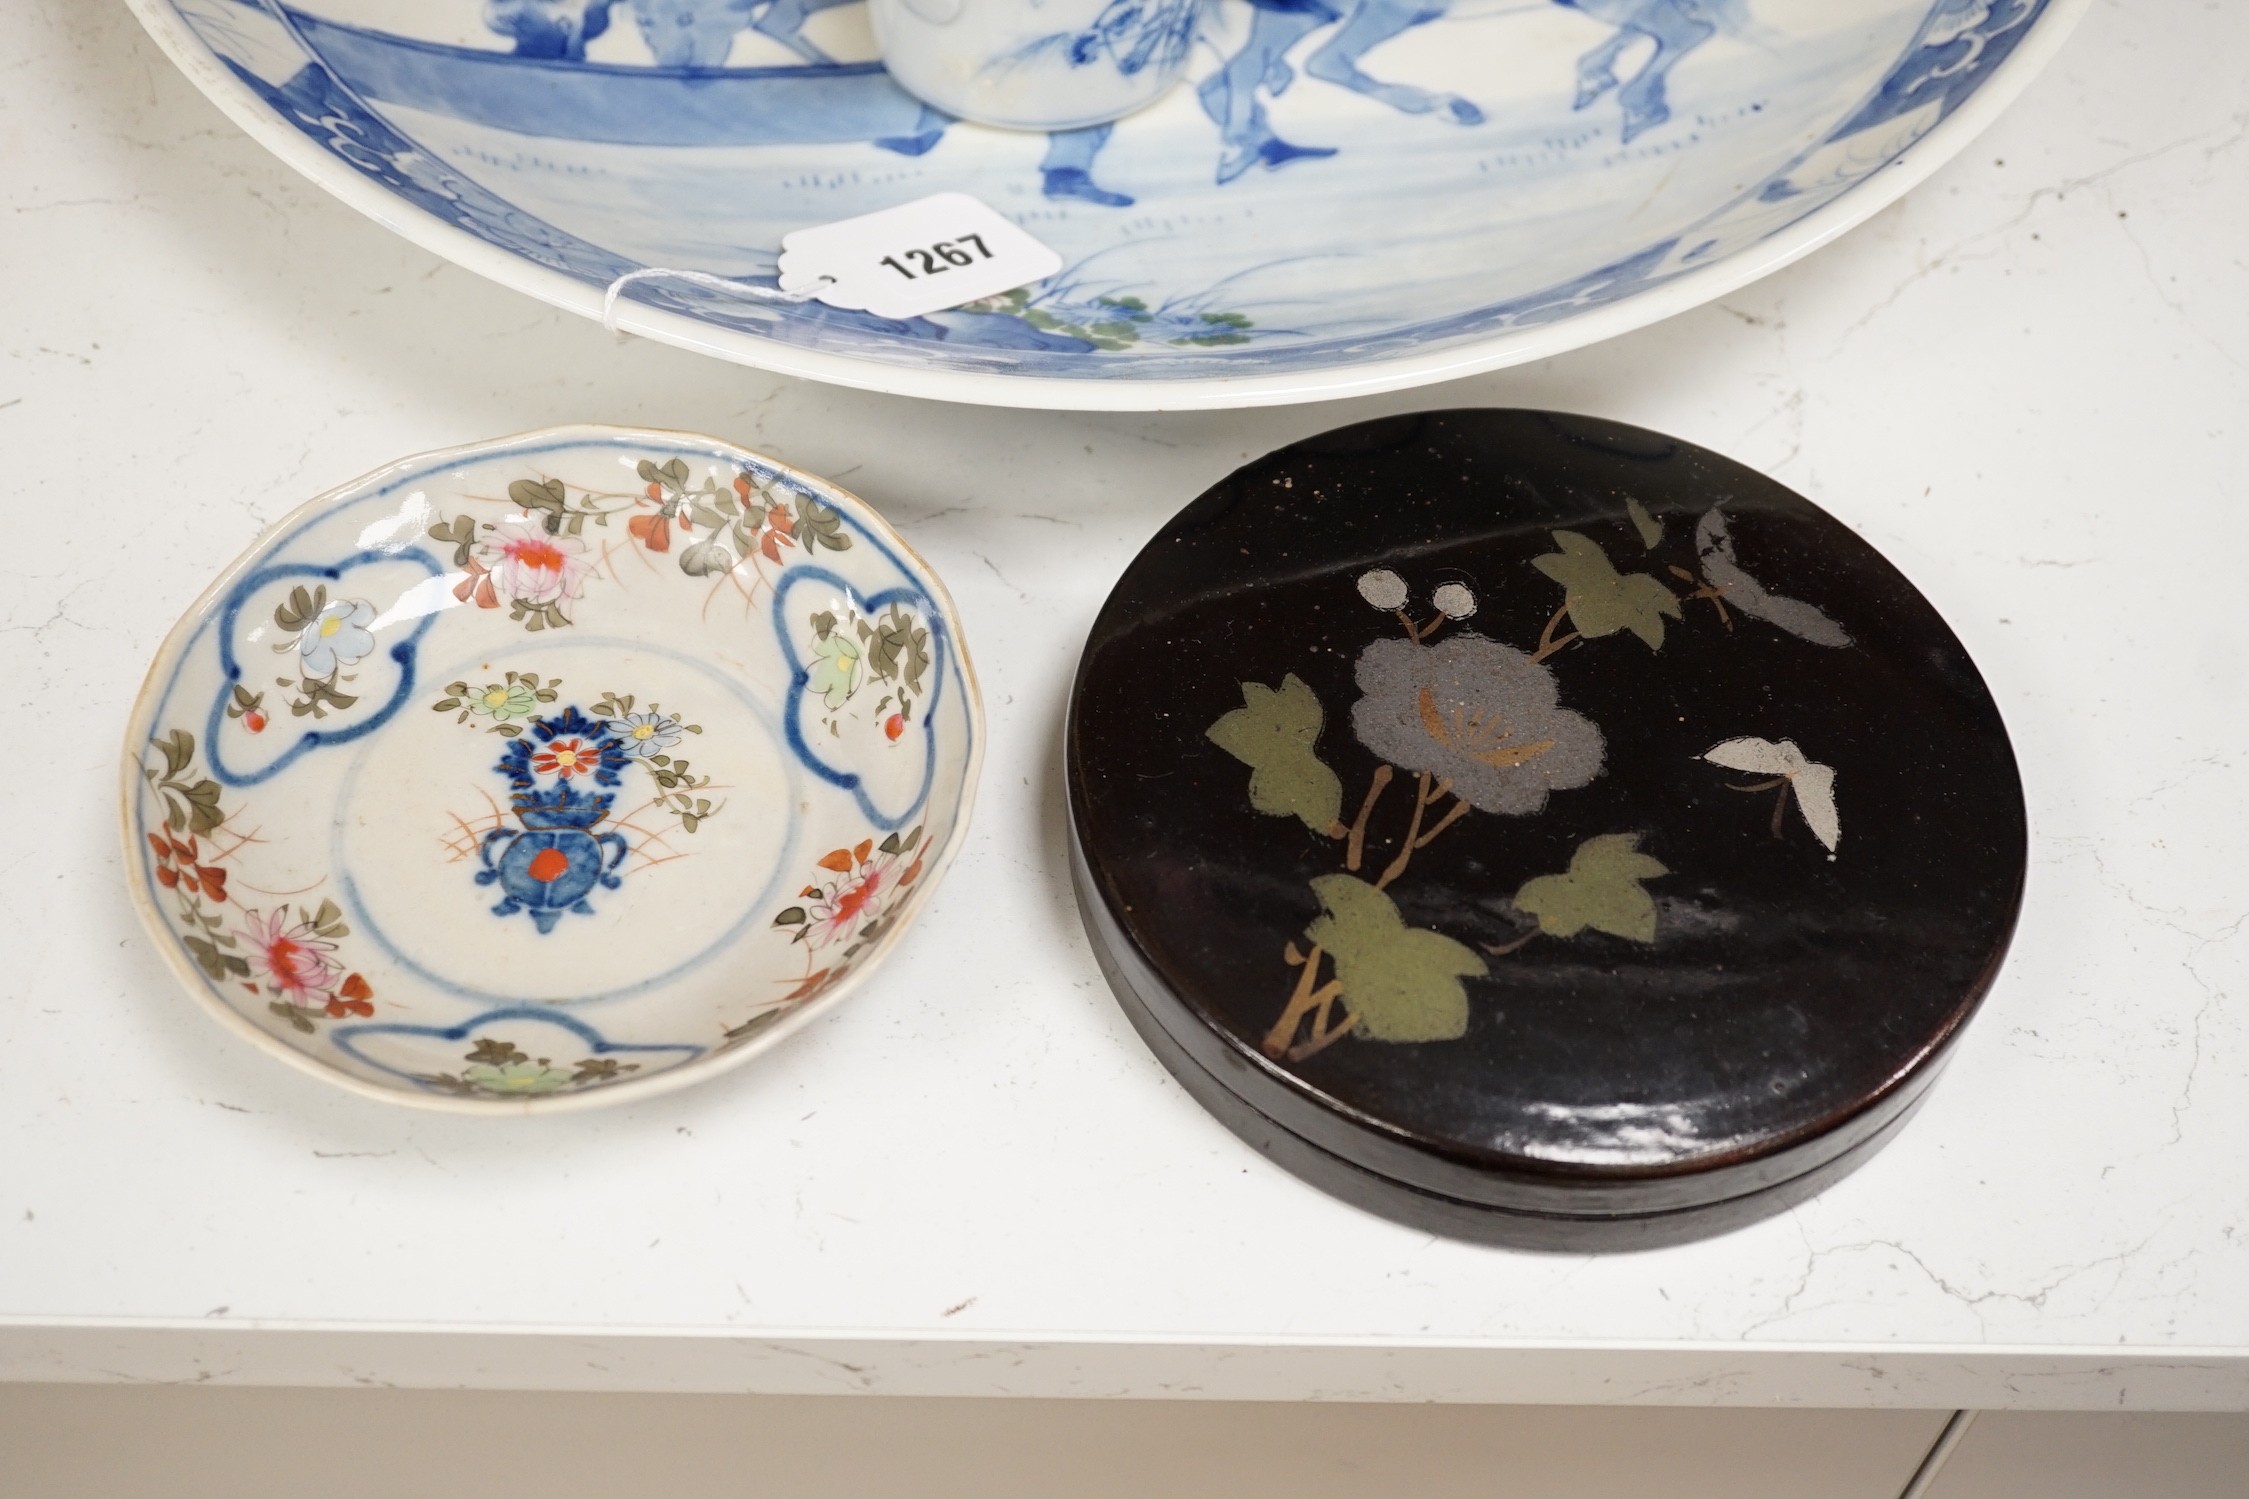 Japanese export wares, including a charger and a lacquer cased hors d’oeuvres set (5), charger 45cms diameter